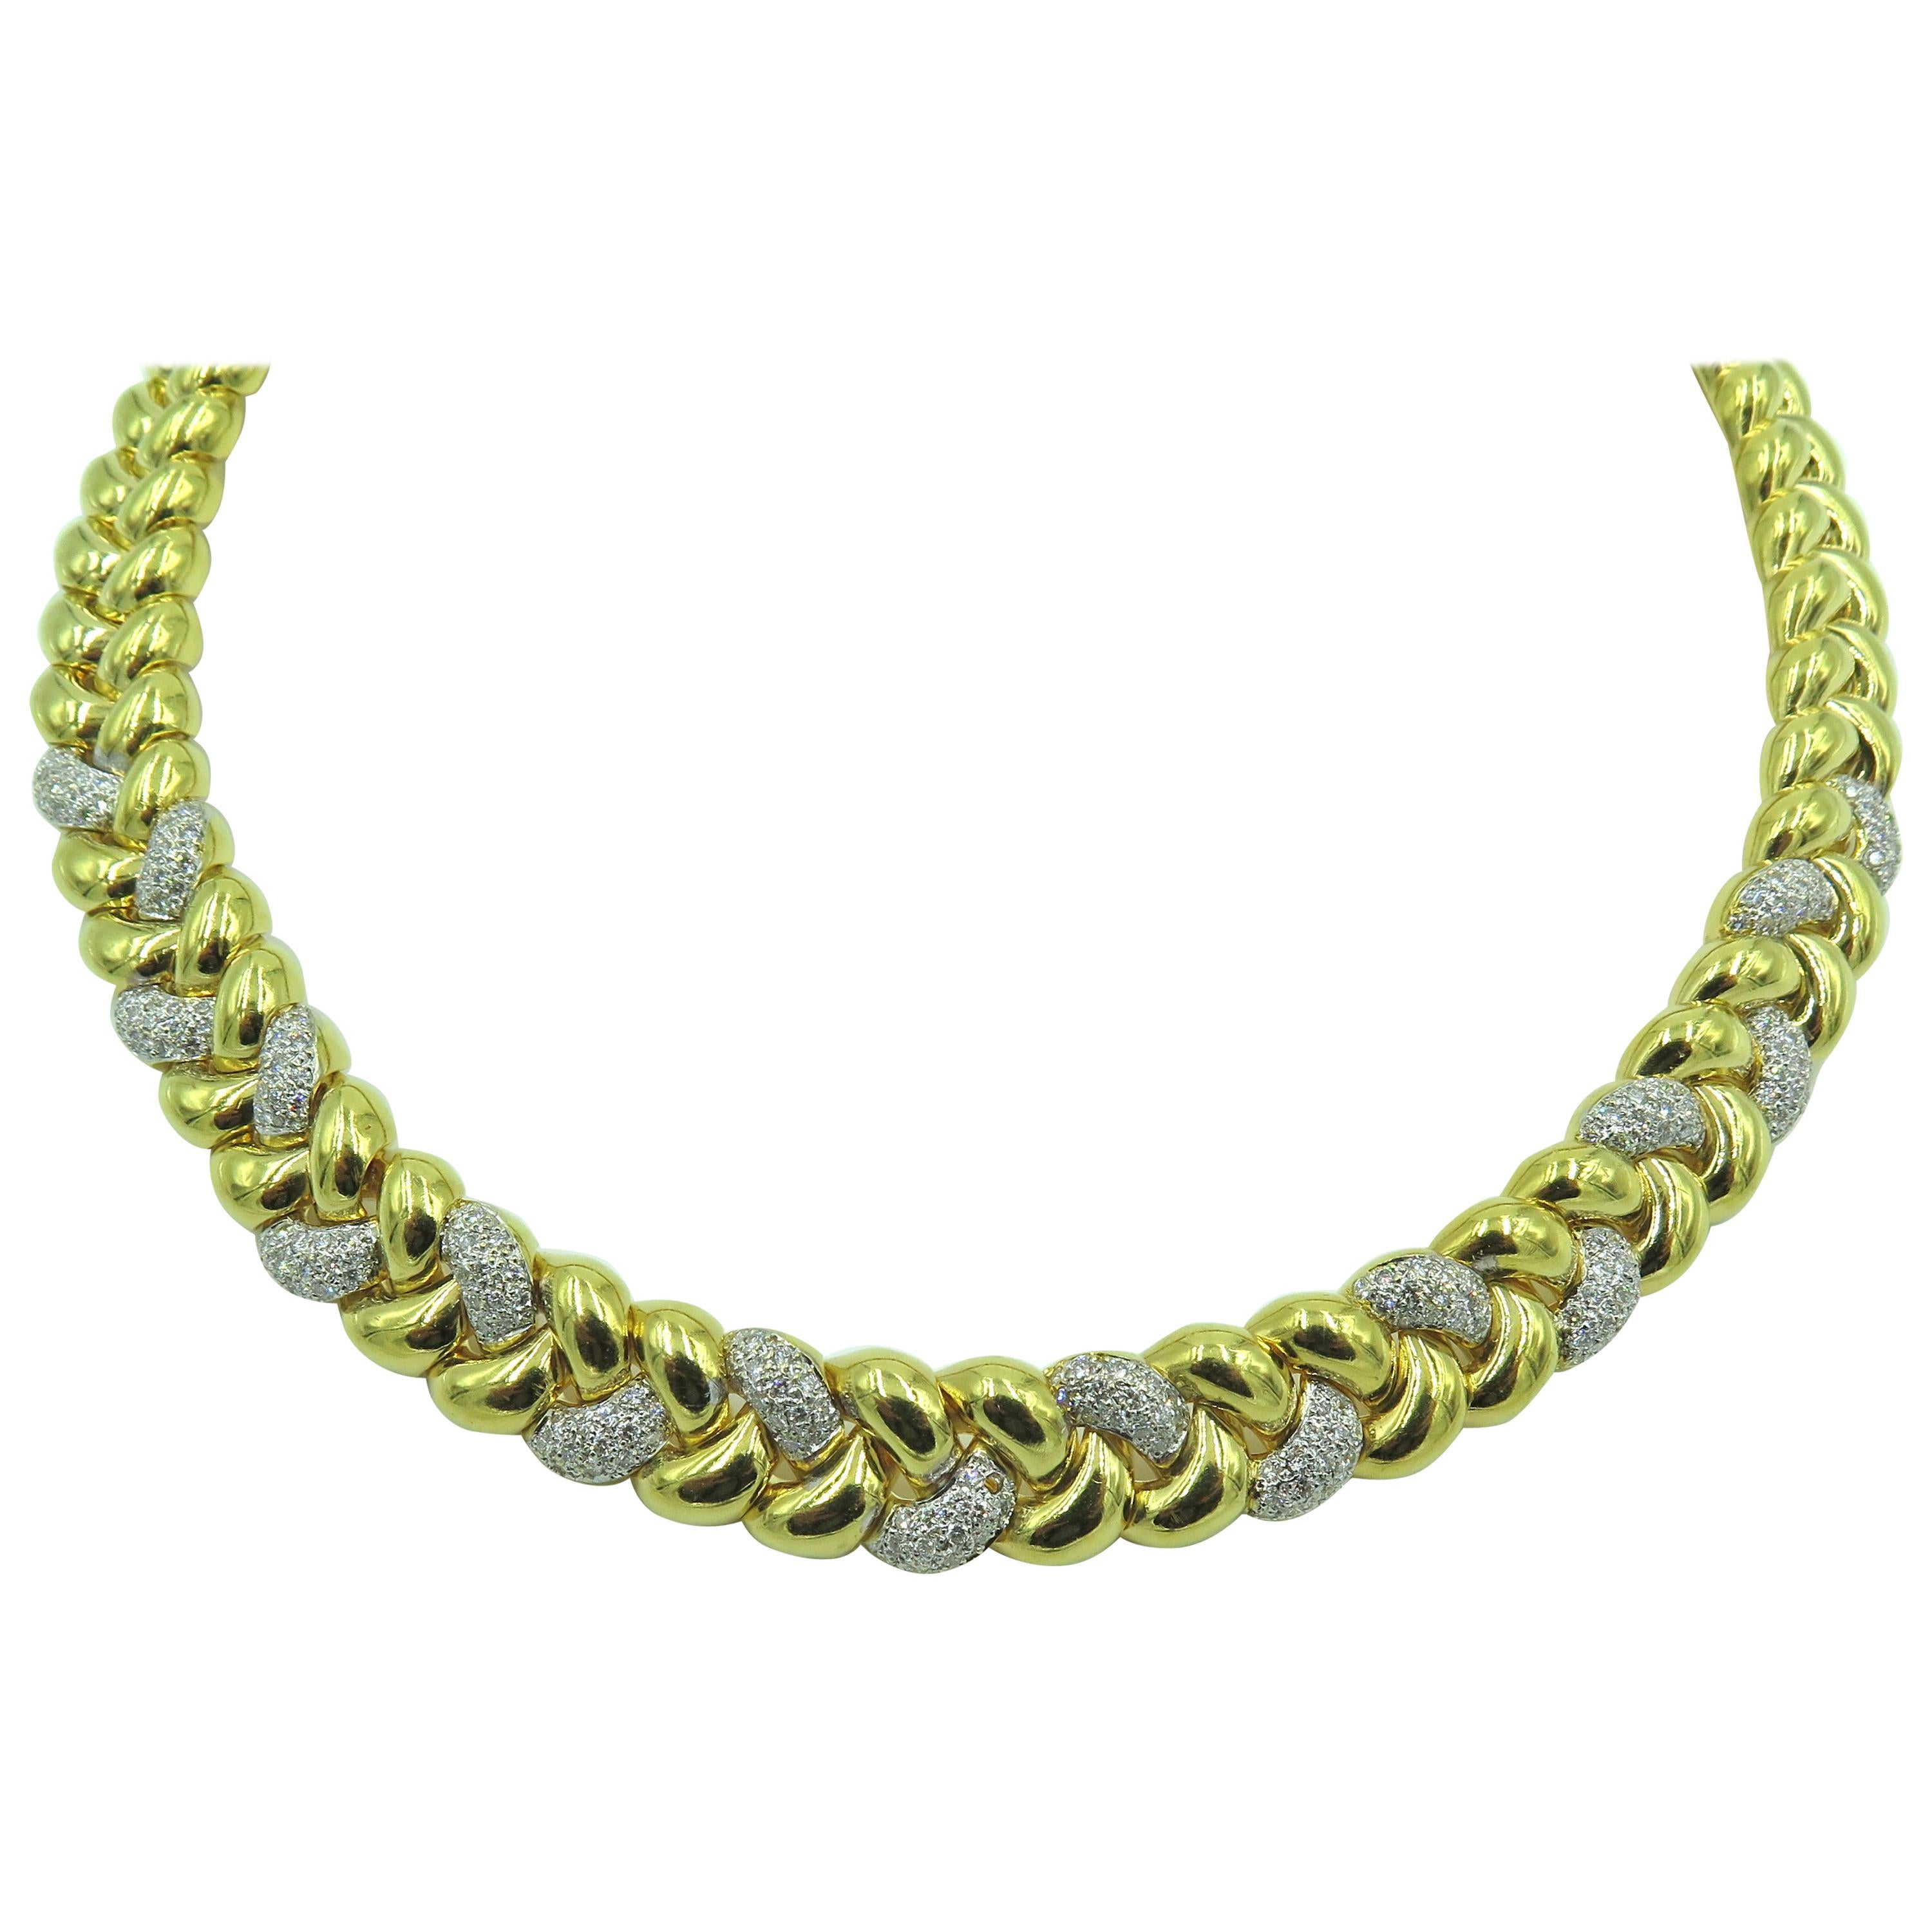 An 18 karat yellow gold and diamond necklace. Italian. Circa 1990. Designed as a polished gold braided collar, enhanced by pave set diamonds. Two hundred and thirty eight diamonds weigh approximately 2.40 carats. Length is approximately 16 1/2